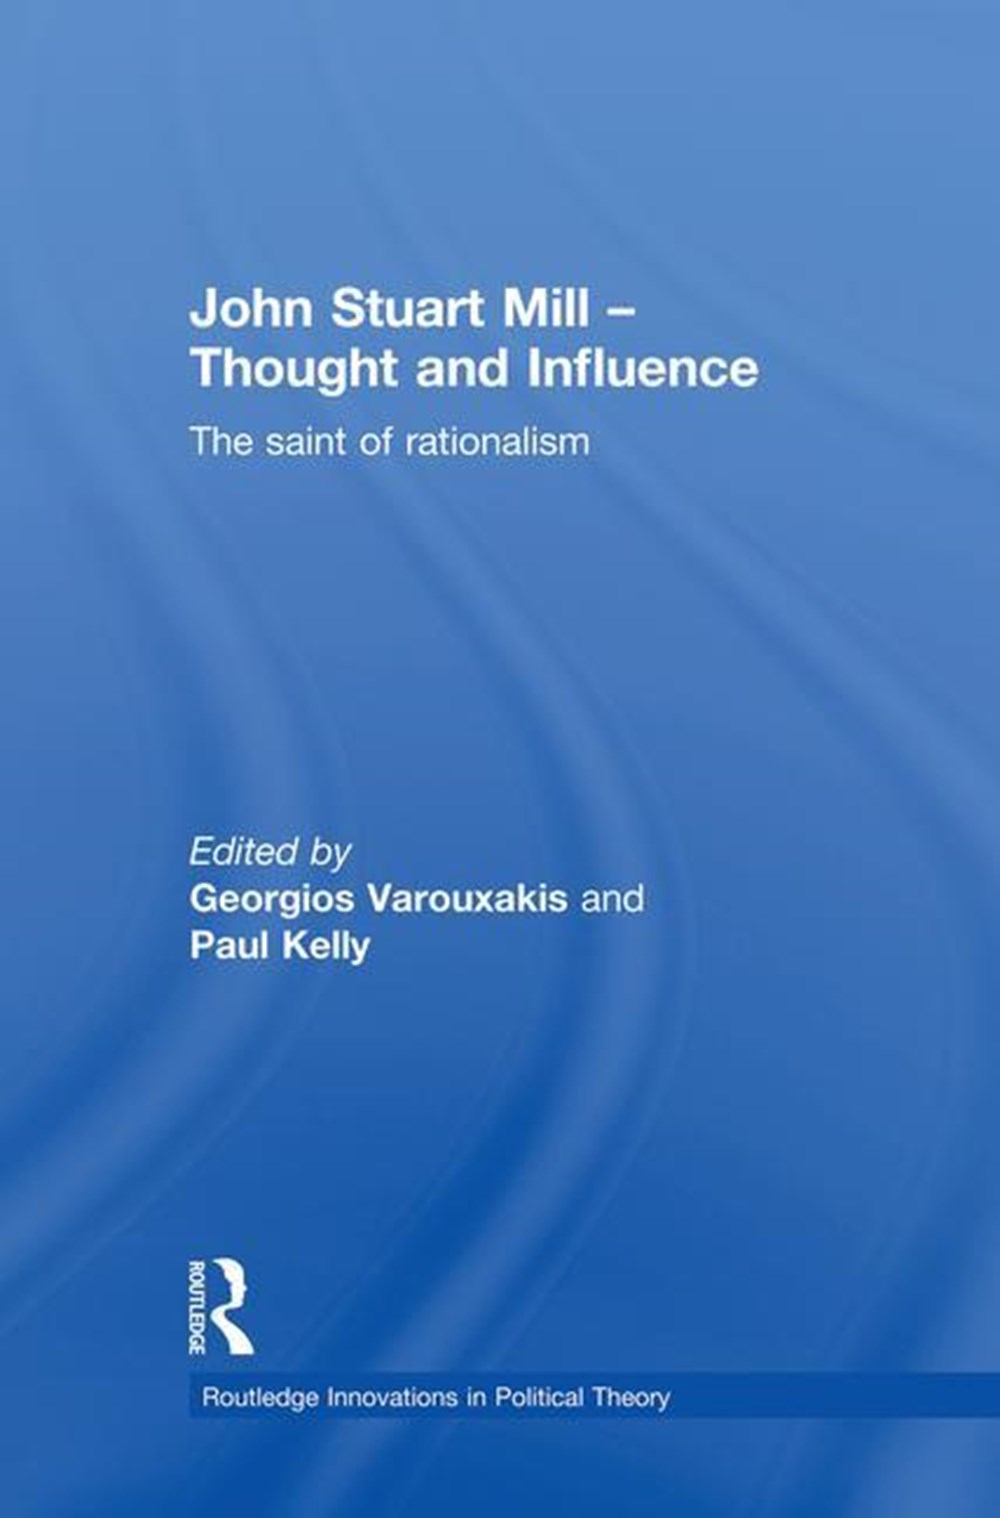 John Stuart Mill - Thought and Influence: The Saint of Rationalism